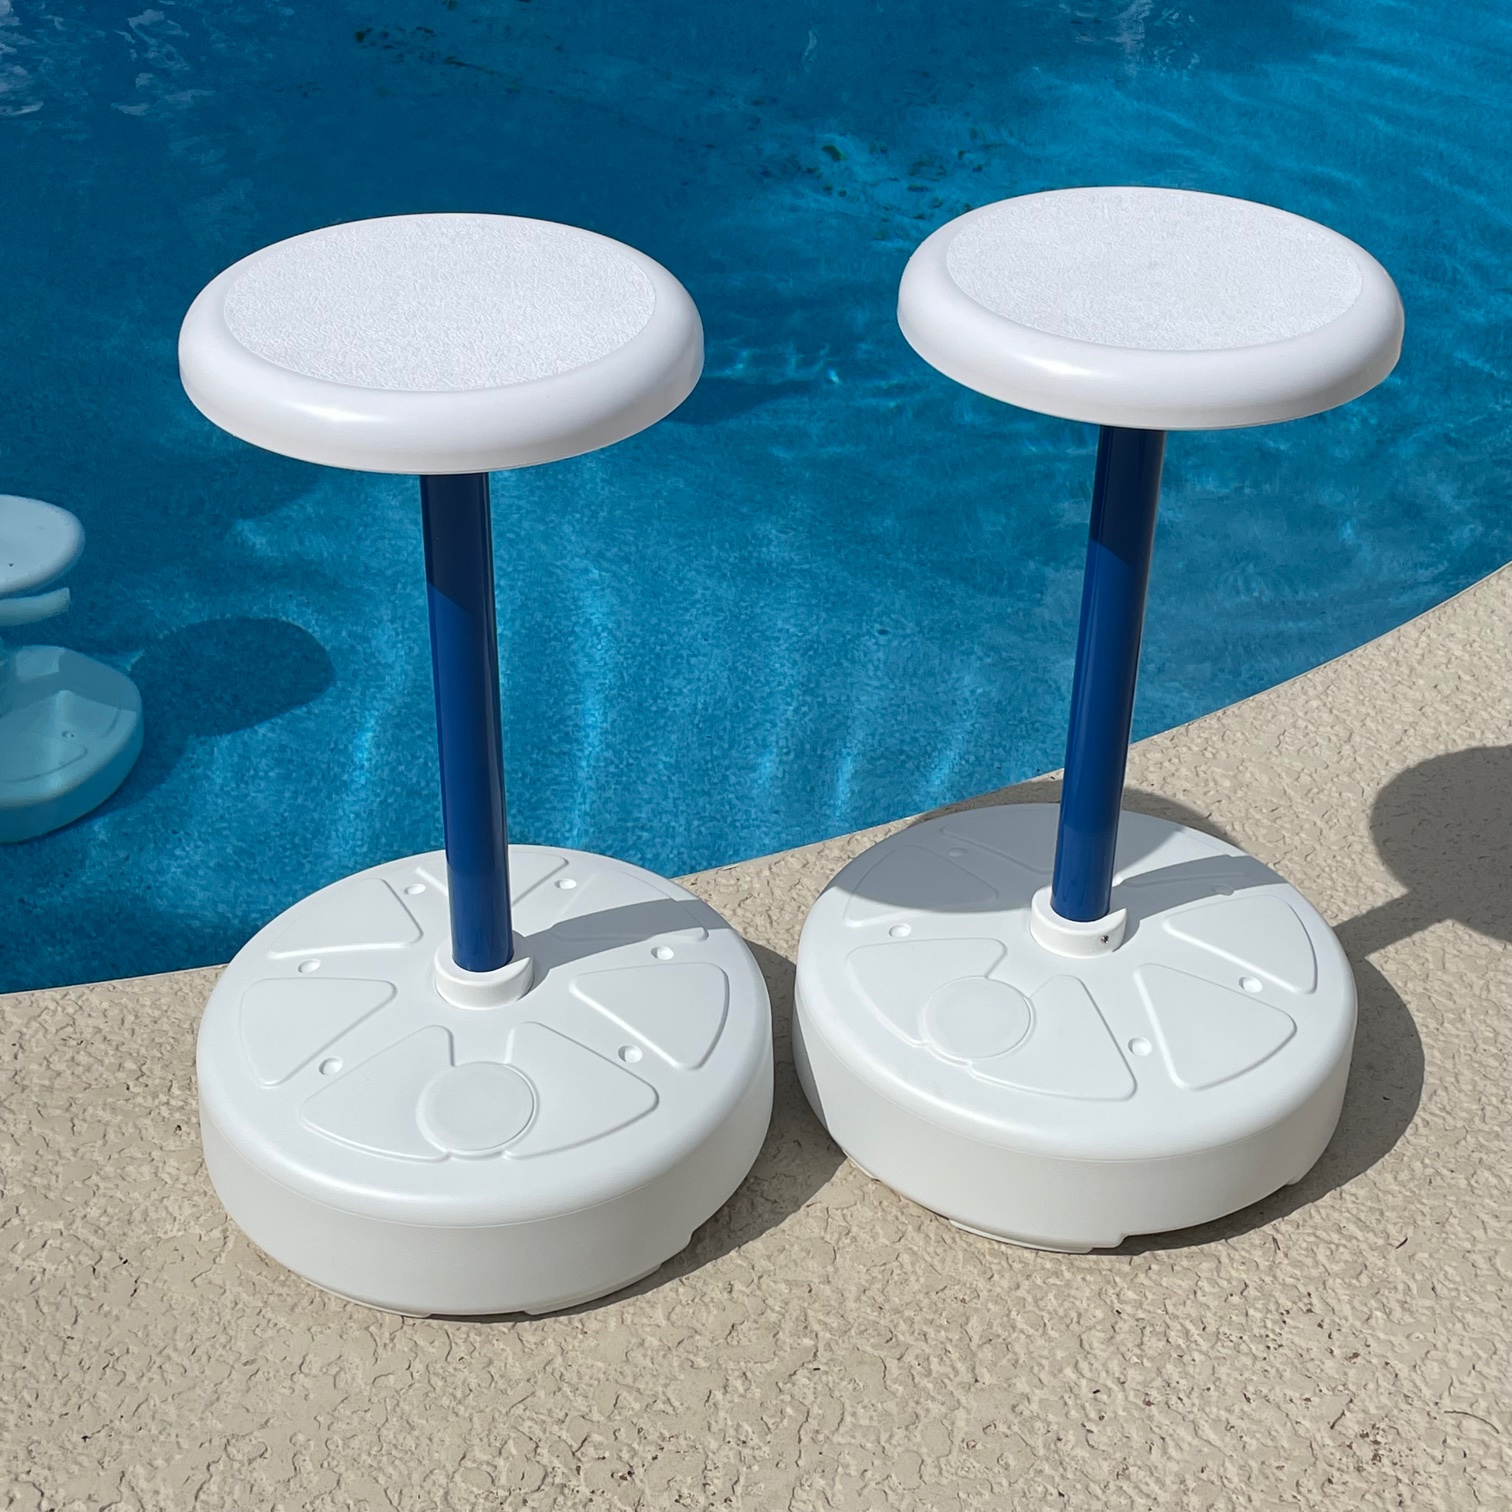 Relaxation Station Swimming Pool Stools, Swimming Pool Bar Stool Dimensions